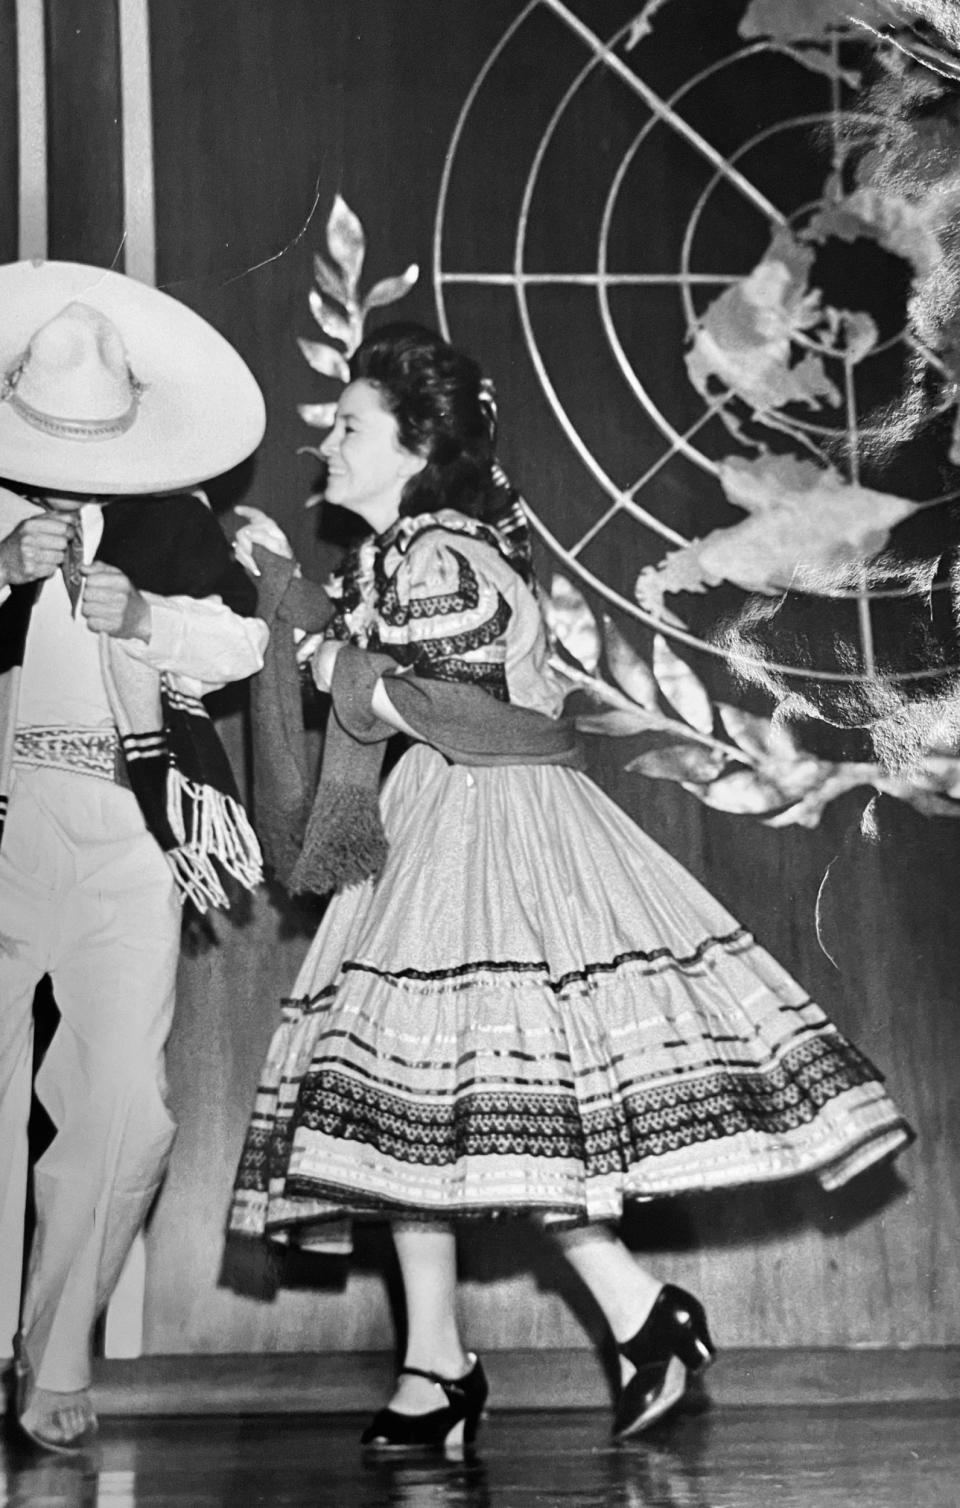 Maria de Lourdes Sotomayor Mehdi performs the El Jarabe Tapatio, otherwise known as the Mexican Hat Dance. (Courtesy Yusuf Mehdi)